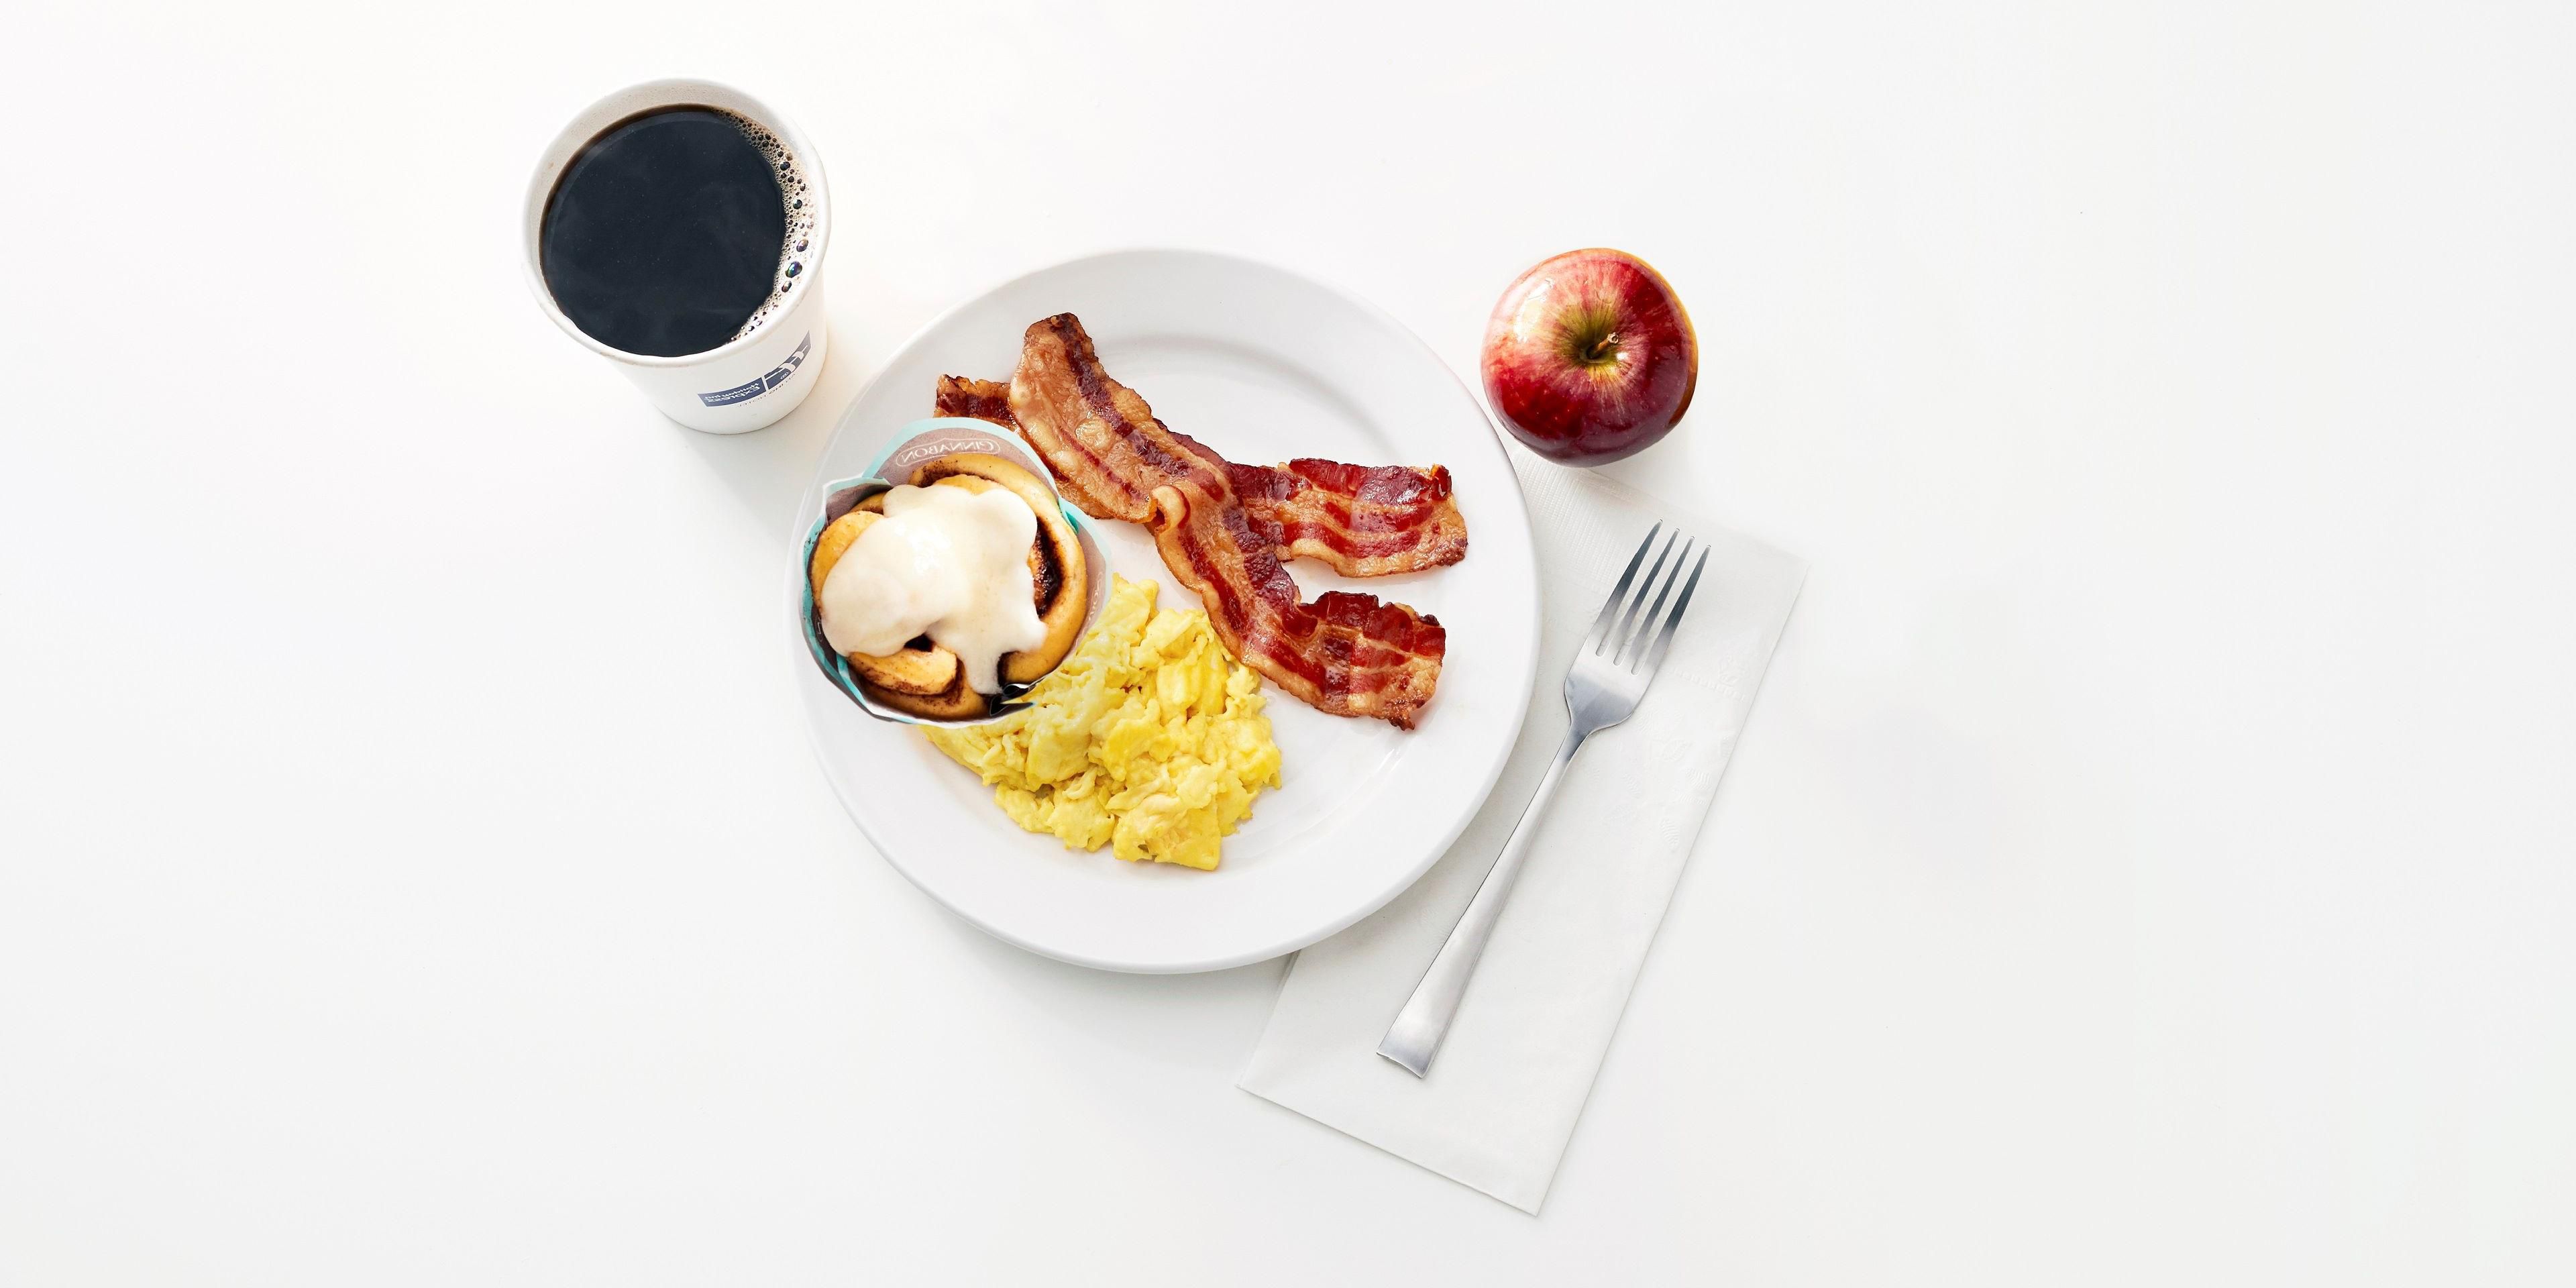 Kick start your day with our free Express Start Breakfast, with grab ‘n’ go options and favorites such as eggs and bacon, hot pancakes, our signature cinnamon rolls and fresh coffee. Offered from 6:30 AM -9:30 AM Mon-Fri and 7:00 AM-10 AM Sat-Sun .